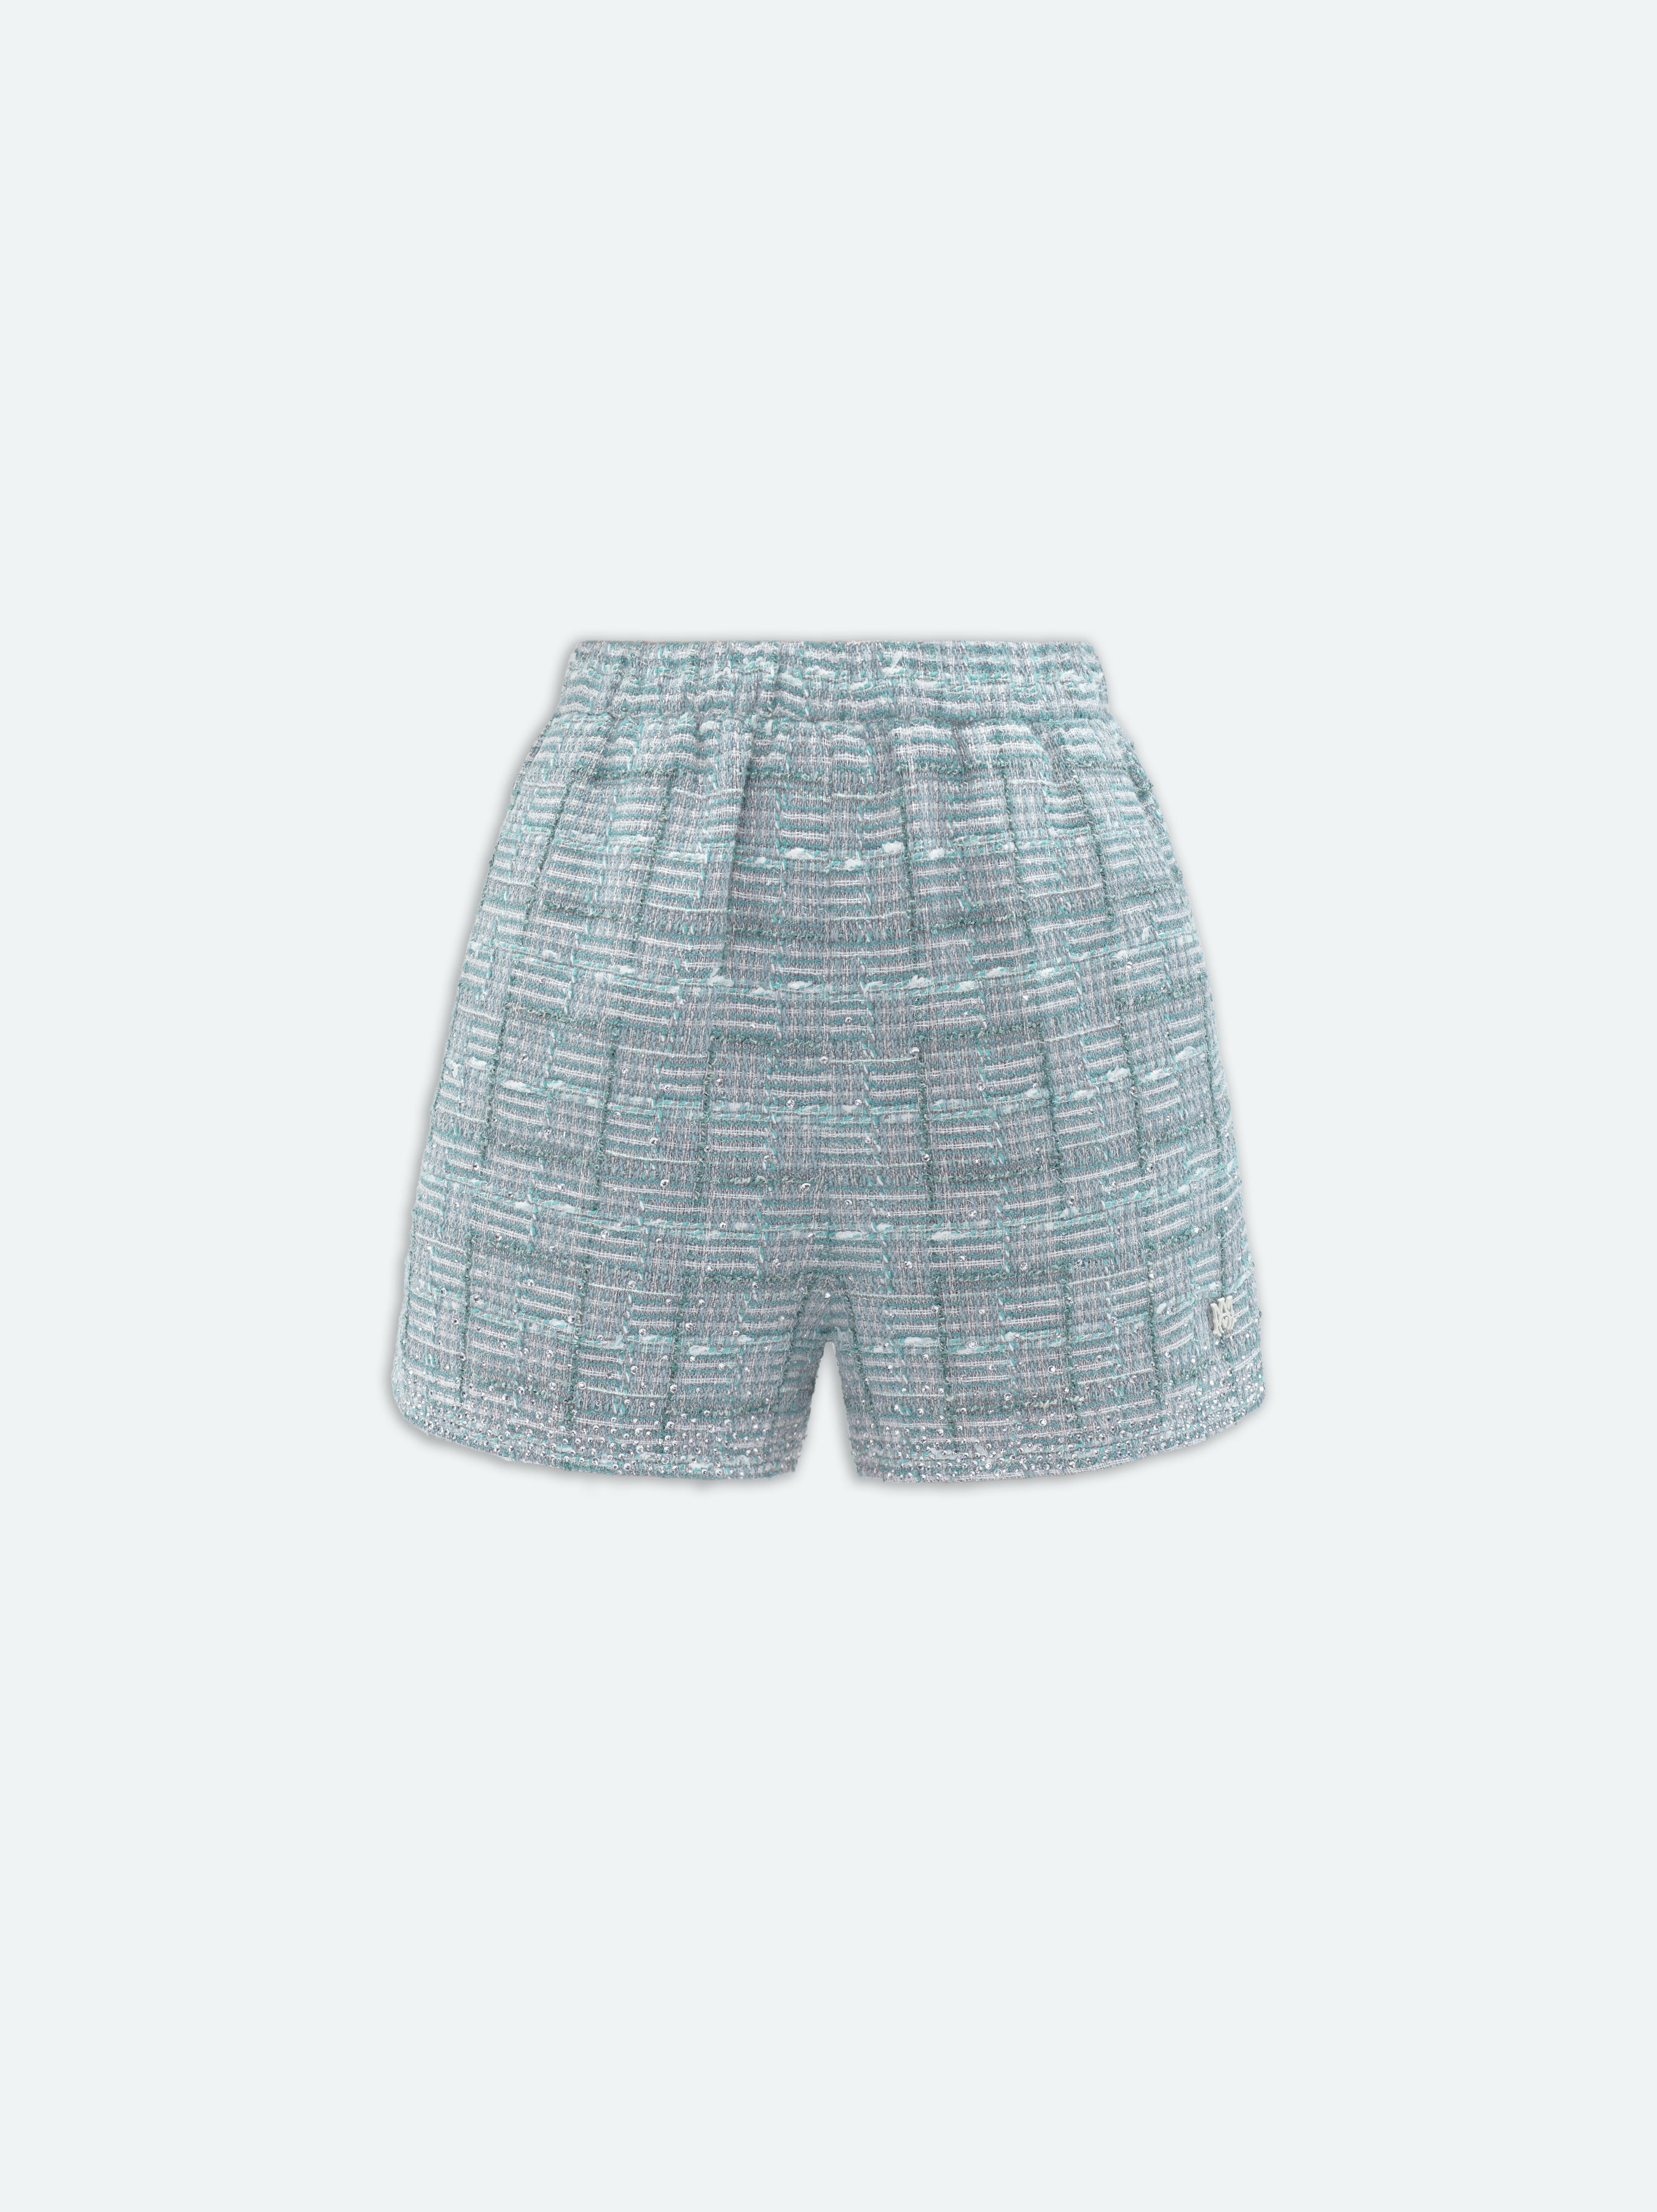 Product WOMEN - CRYSTAL BOUCLE SHORT - Green featured image